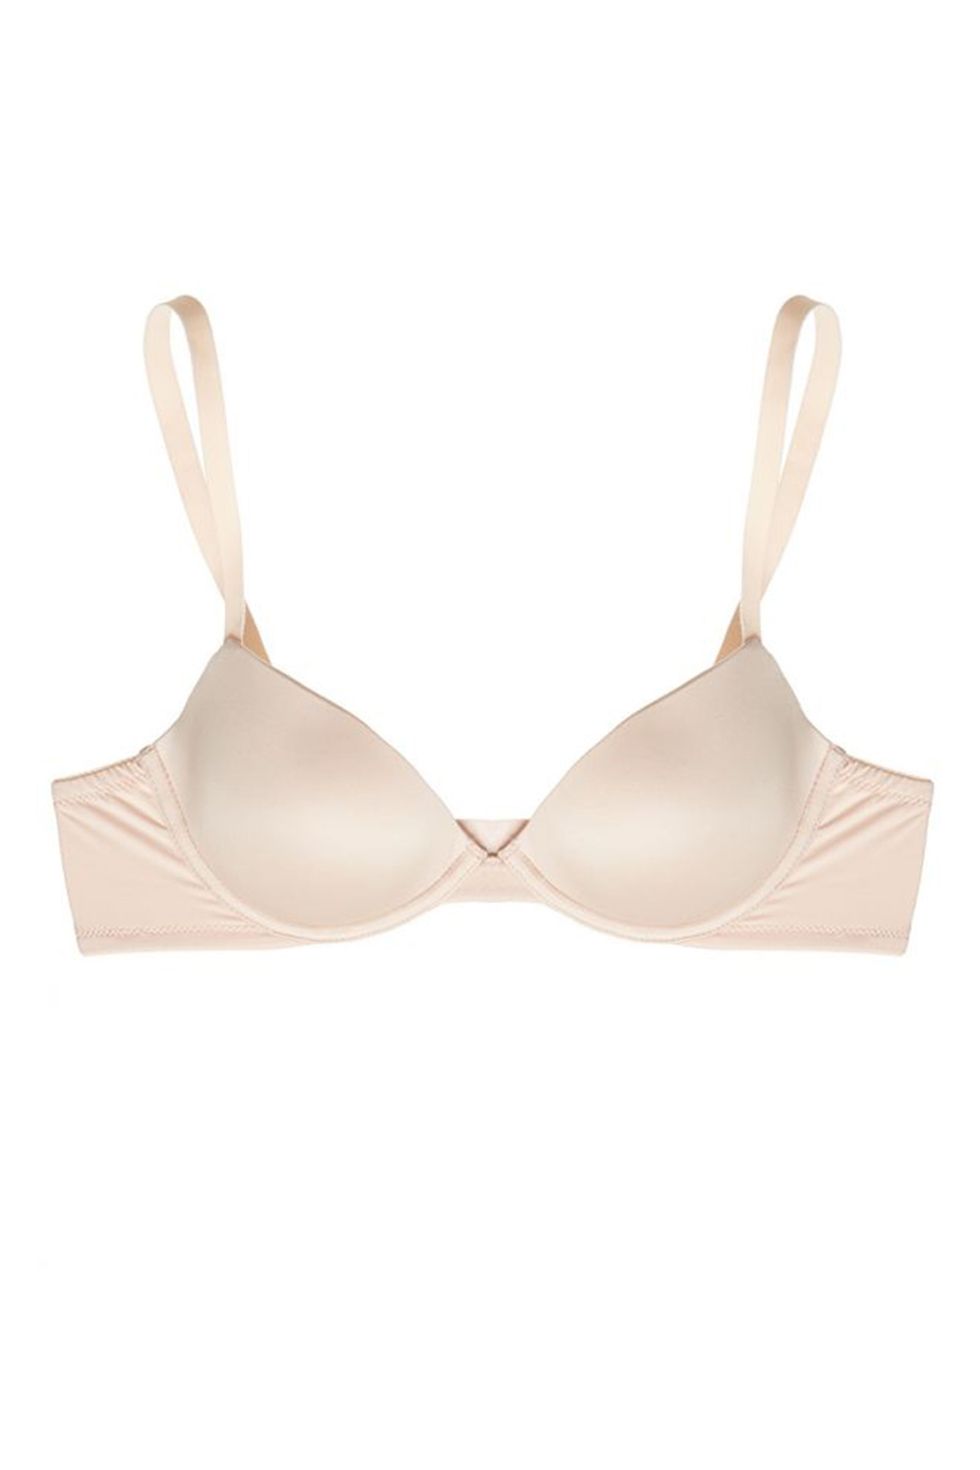 who are we to argue with our customers? our dayflex push up bra is